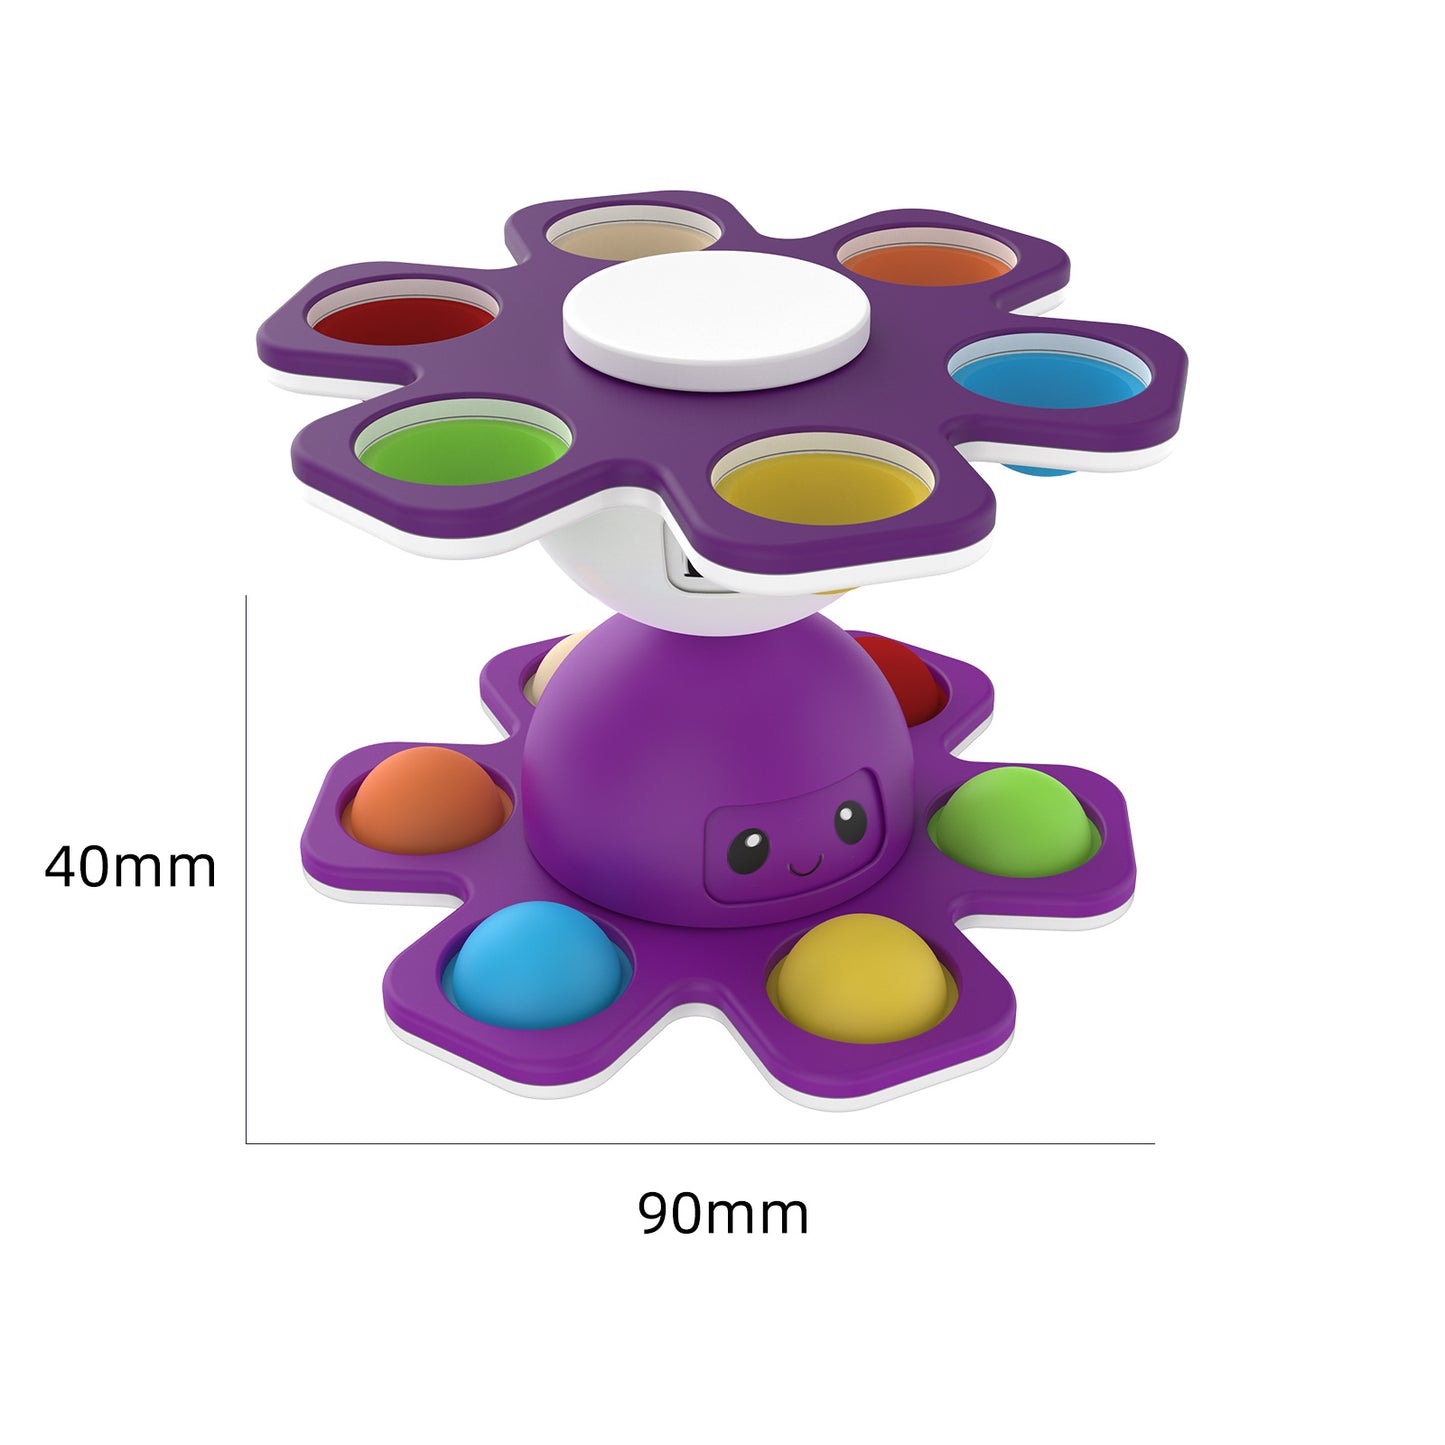 2pcs*Octopus Pop Fidget Spinners It Party Favors Toy, Face Changing Hand Spinner with Bubble Popping Game Sensory Fidget Toy - Autism ADHD Special Needs Stress Reliever